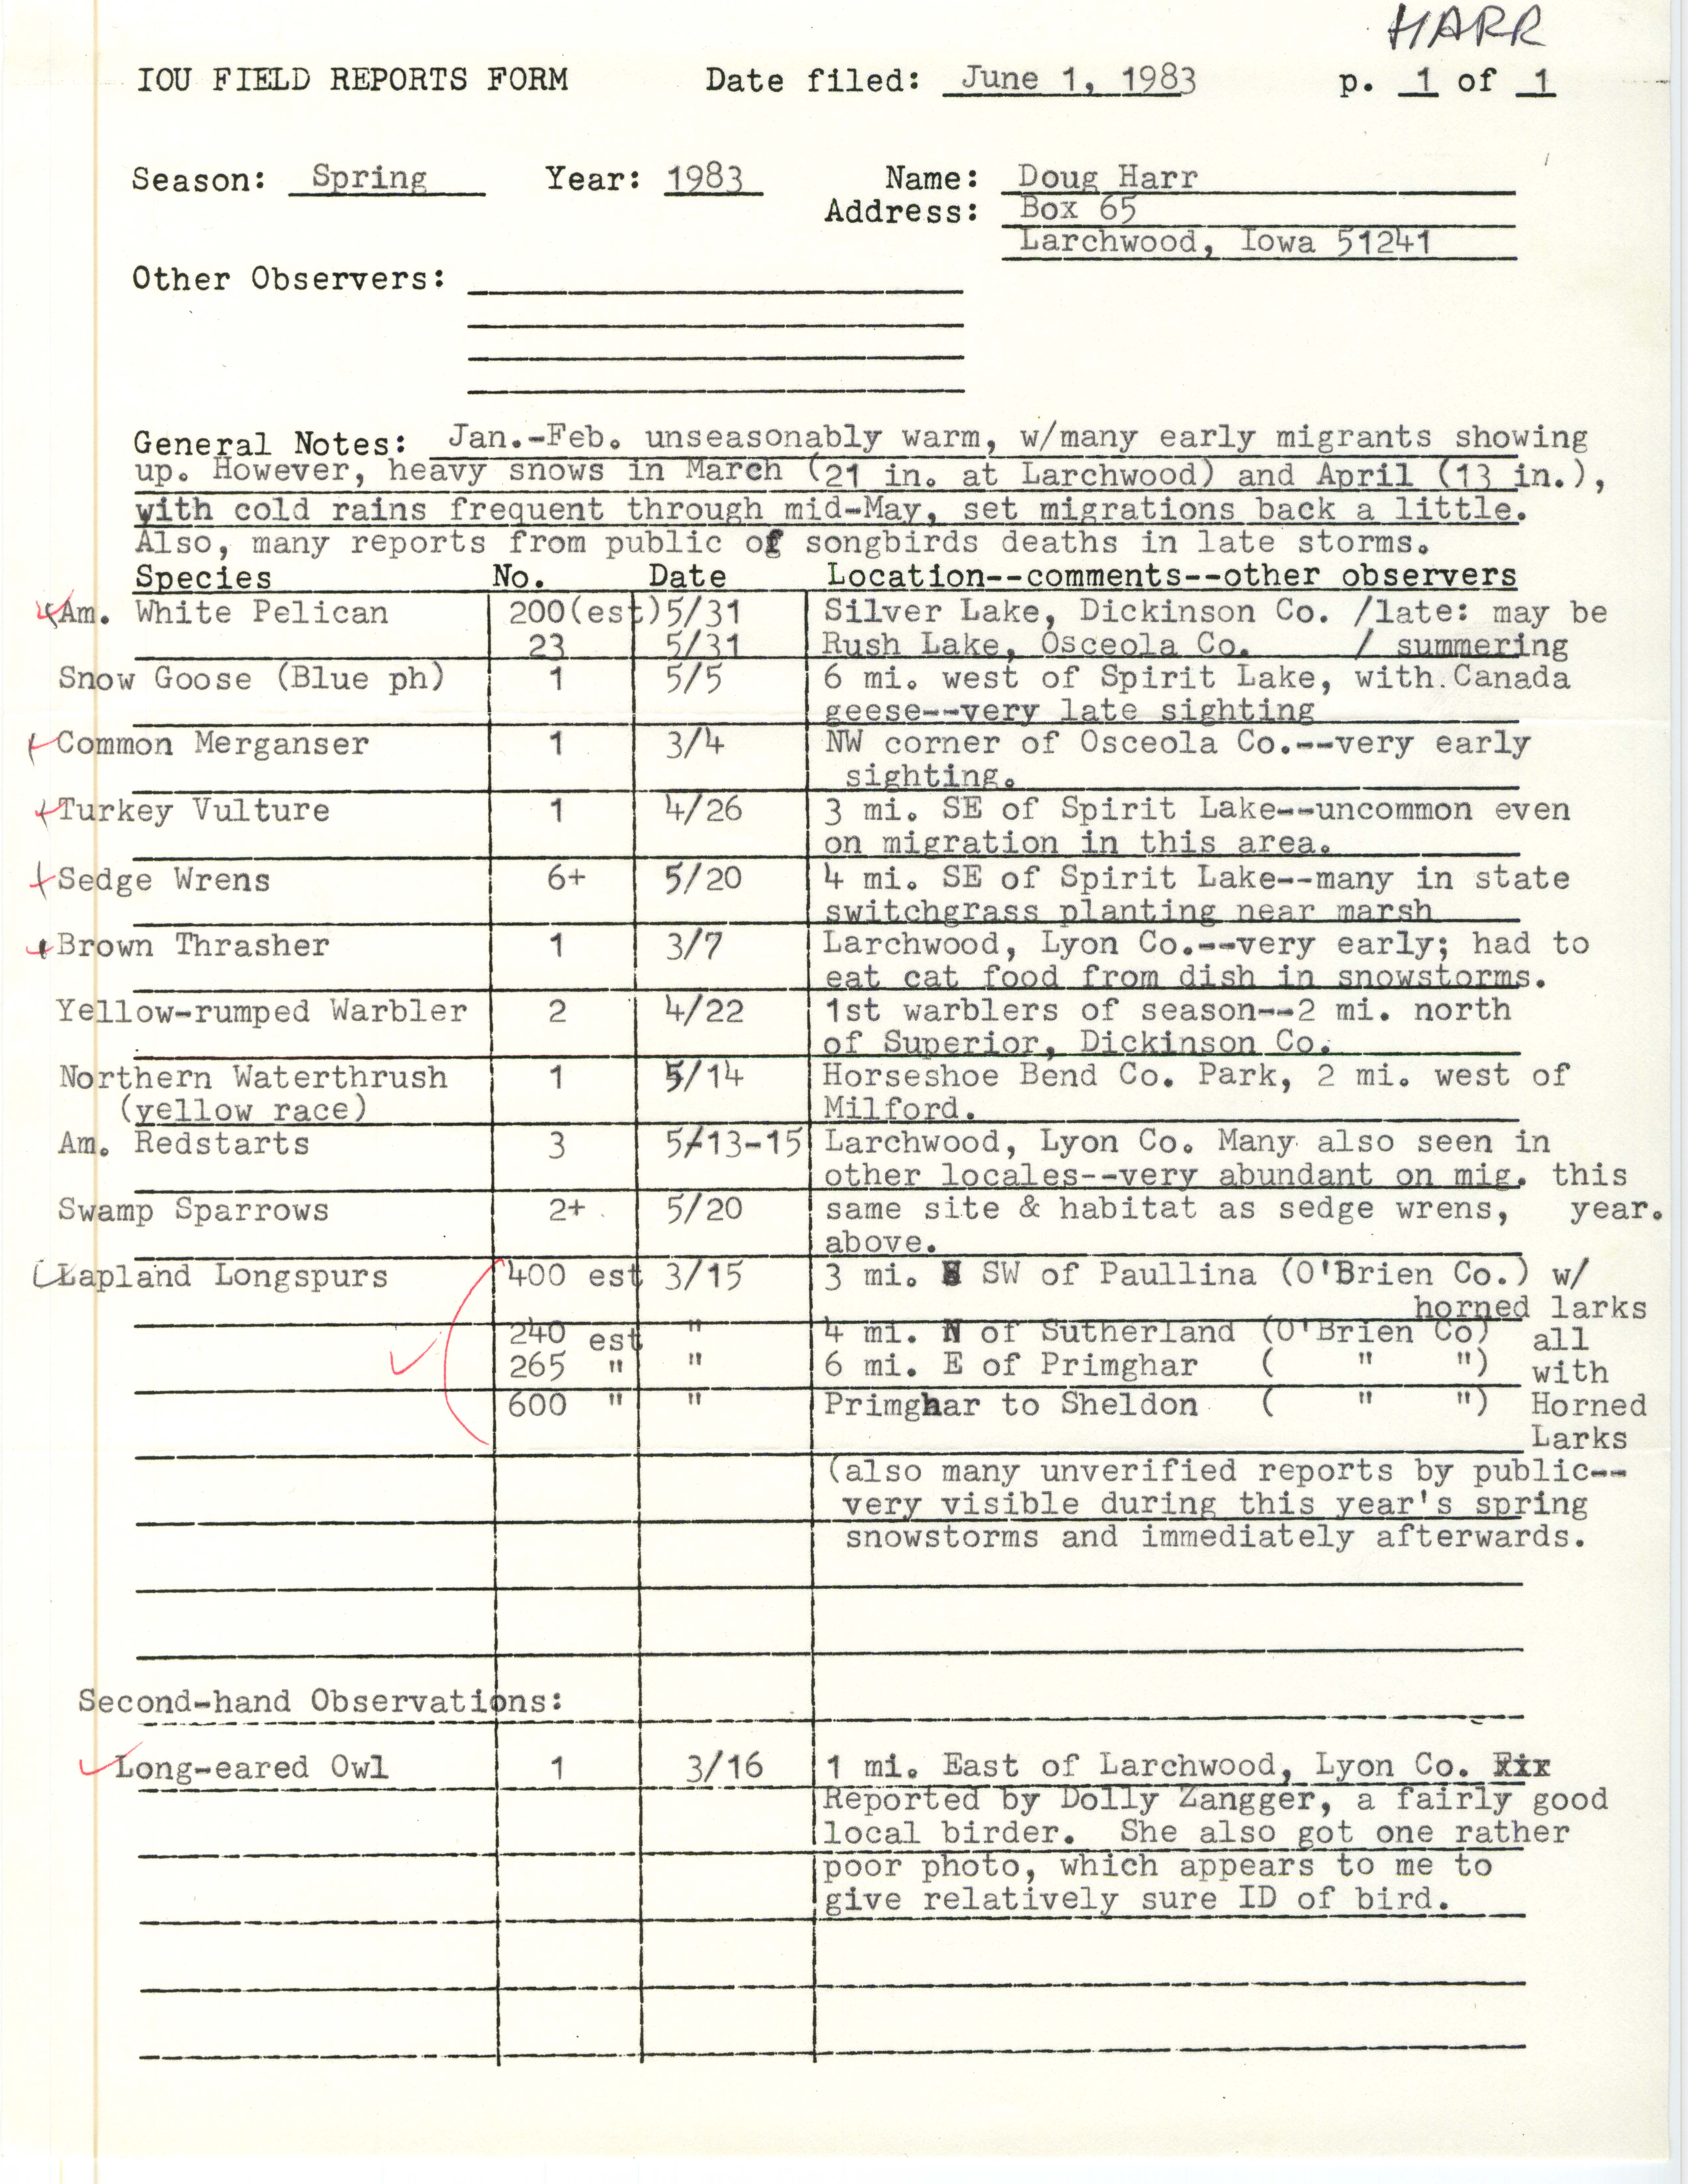 IOU field report form contributed by Douglas C. Harr, June 1, 1983